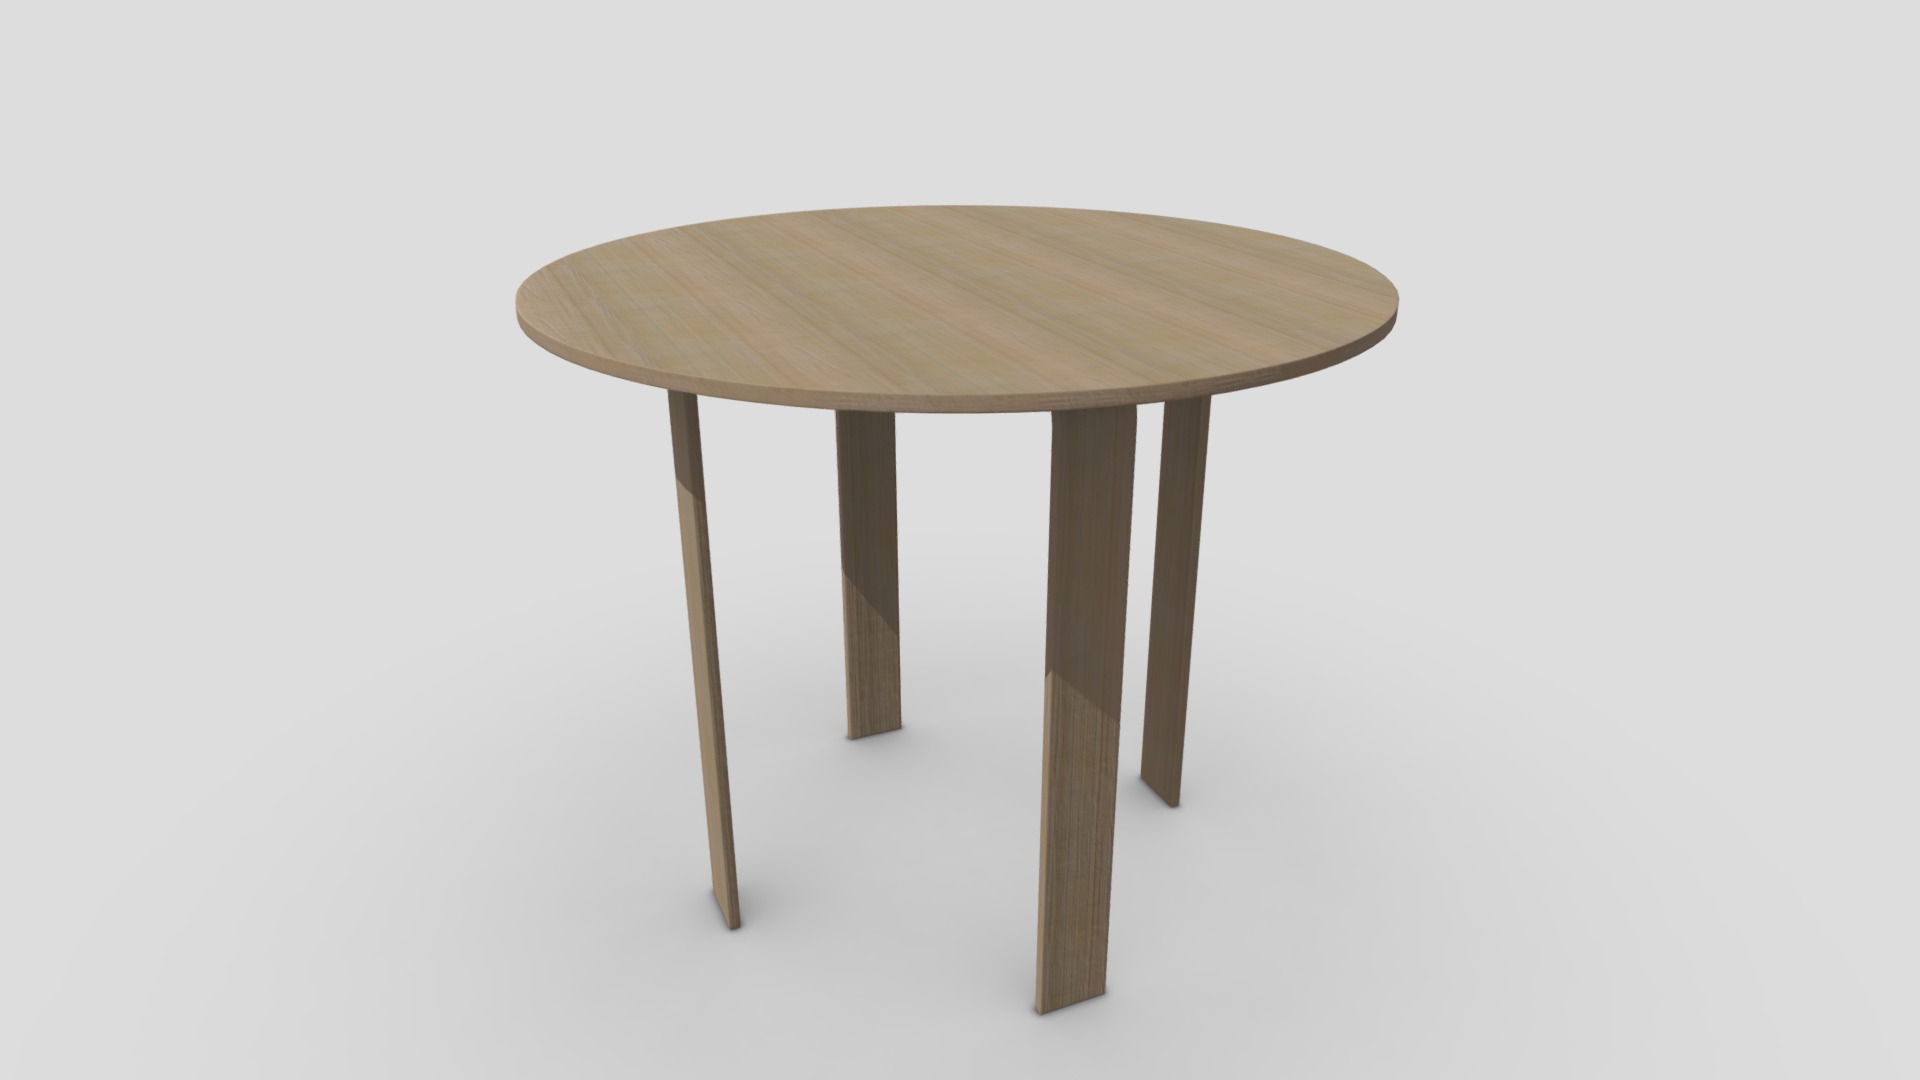 3D model Table 4 - This is a 3D model of the Table 4. The 3D model is about a wooden table with legs.